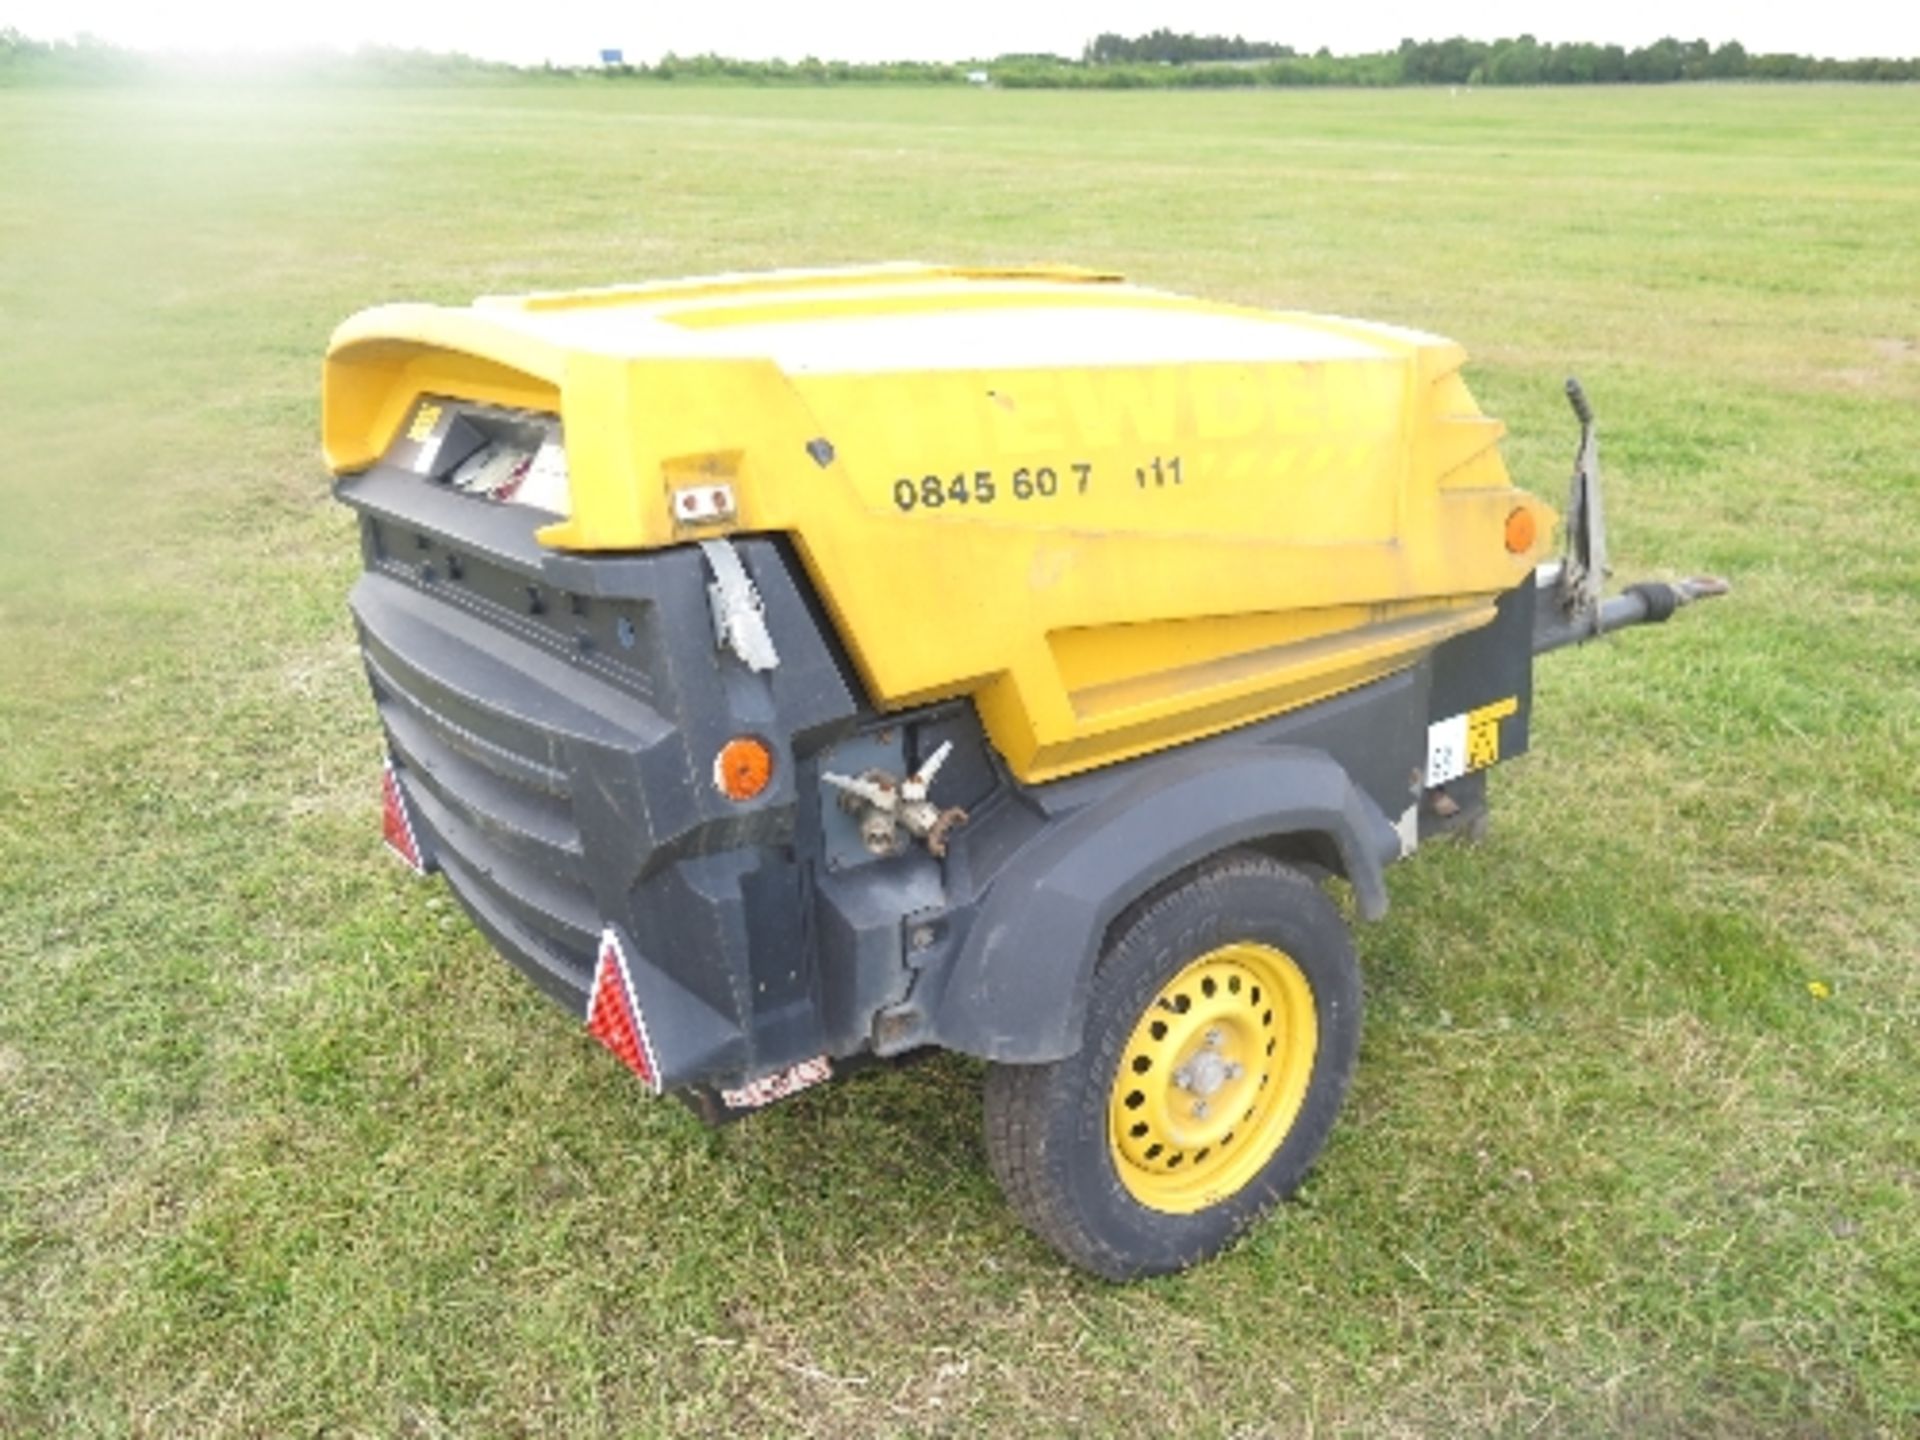 Atlas Copco XAS47 compressor 2007 154151
455 HOURS - KUBOTA - RUNS AND MAKES AIR
ALL LOTS are SOLD